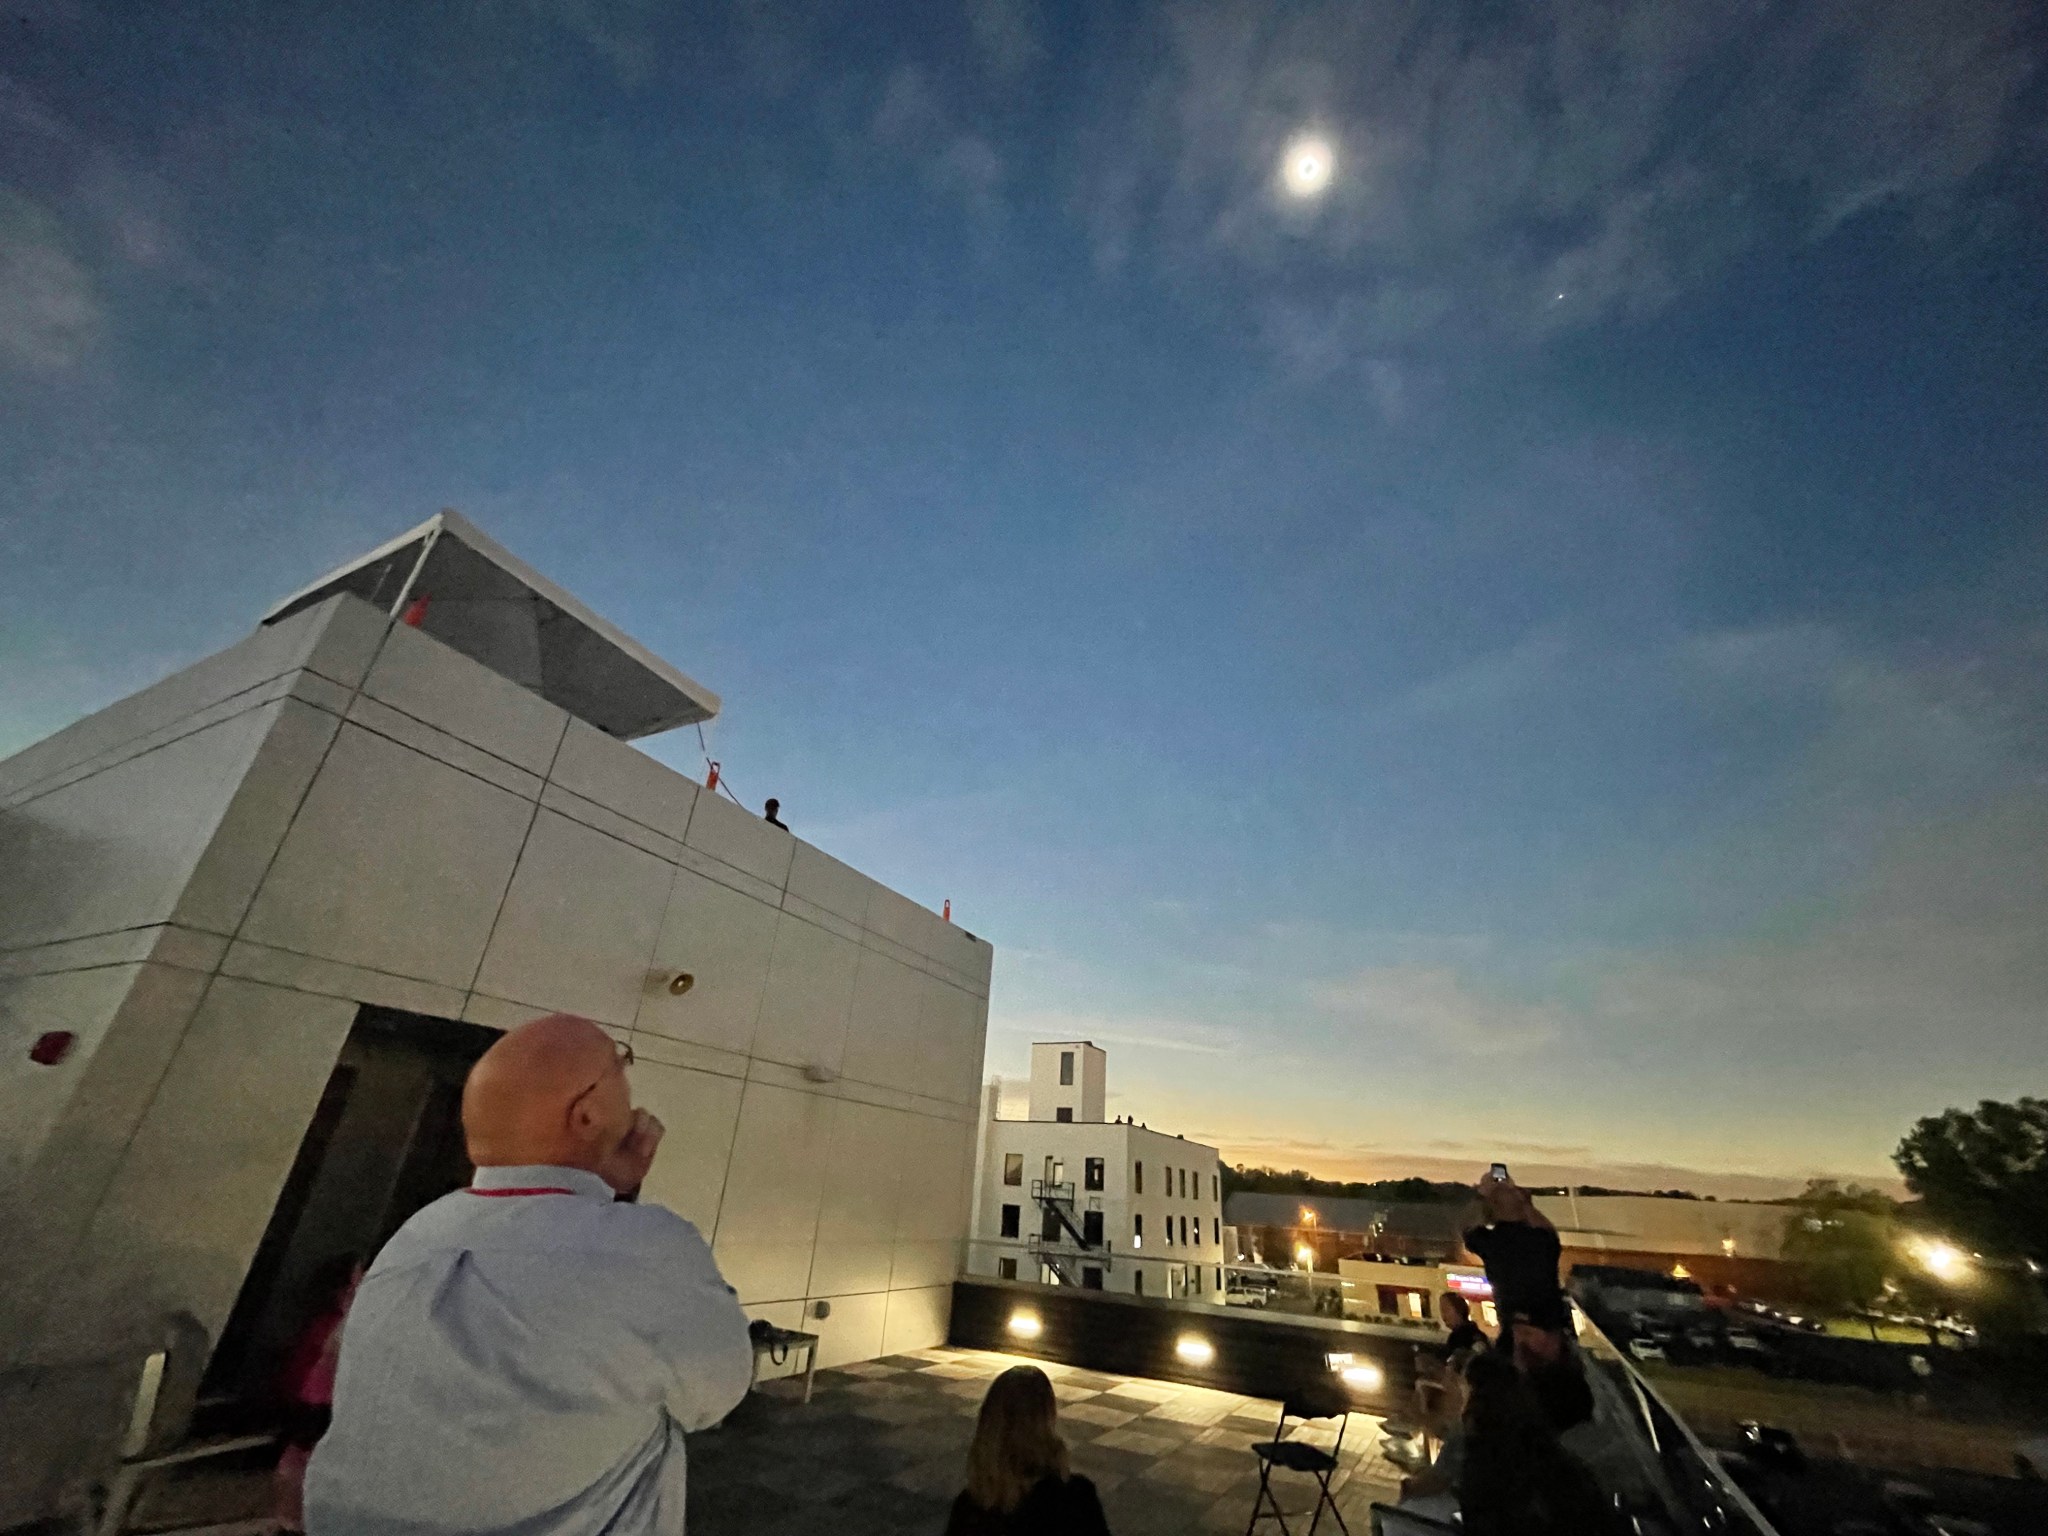 Marshall Space Flight Center Director Joseph Pelfrey watches the 2024 total solar eclipse from the mezzanine of the Russellville Central Fire Station in downtown Russellville, Arkansas, on April 8. Pelfrey spoke during a press conference the morning of the eclipse, alongside Stennis Space Center Acting Director John Bailey, retired astronaut Mike Massimino, NASA scientists, and Russellville and Pope County community leaders. Pelfrey shared updates on the data that NASA's Heliophysics Division, based at Marshall, planned to collect from the eclipse to improve life here on Earth.